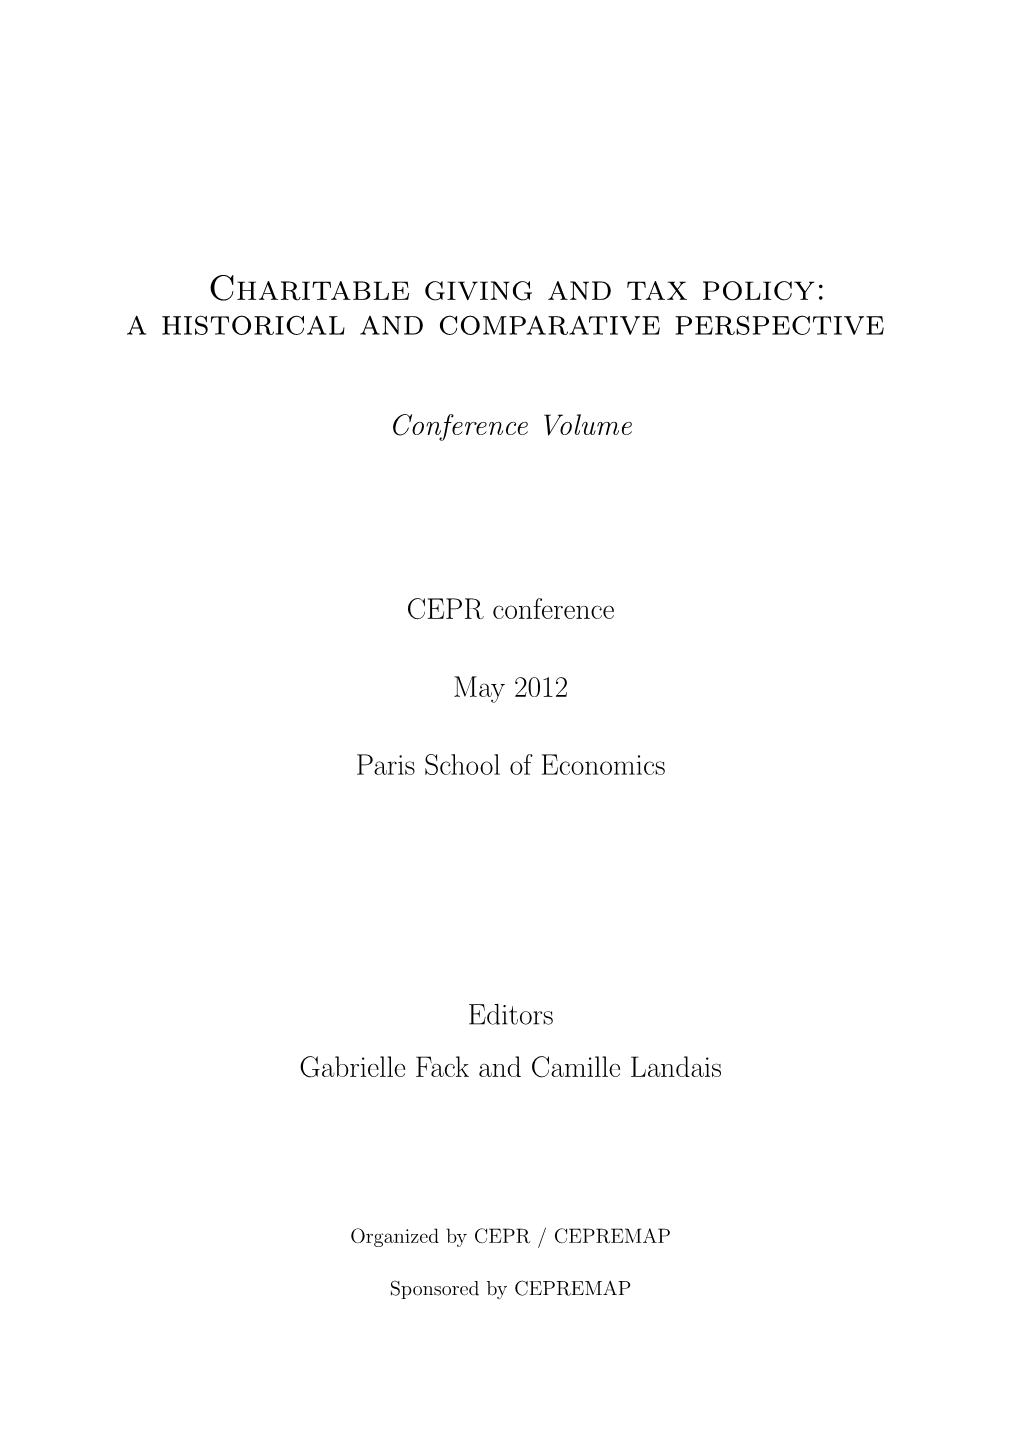 Charitable Giving and Tax Policy: a Historical and Comparative Perspective